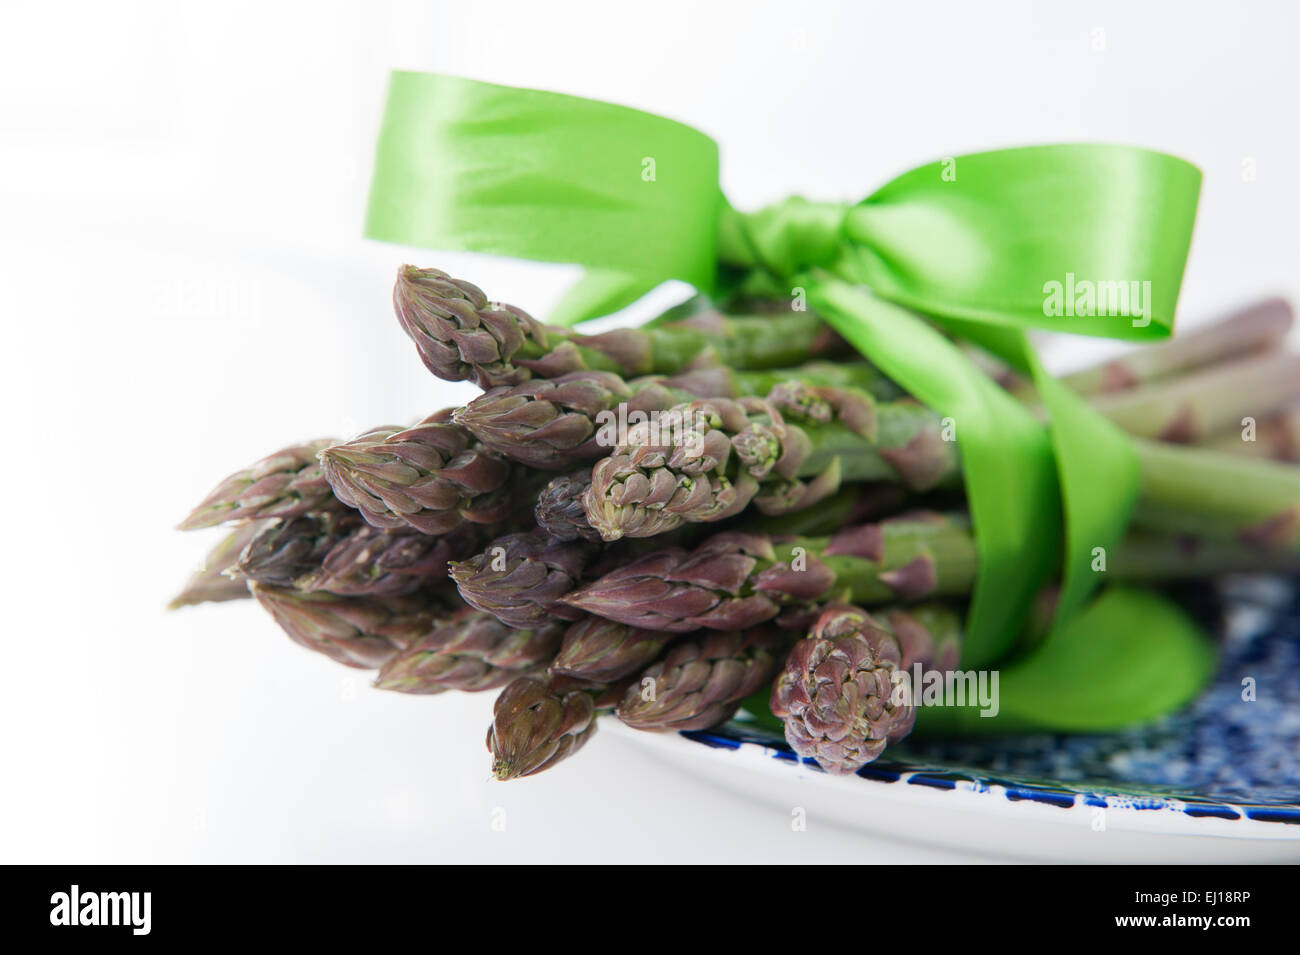 Bunch of Green Asparagus studio shot with a ribbon Stock Photo